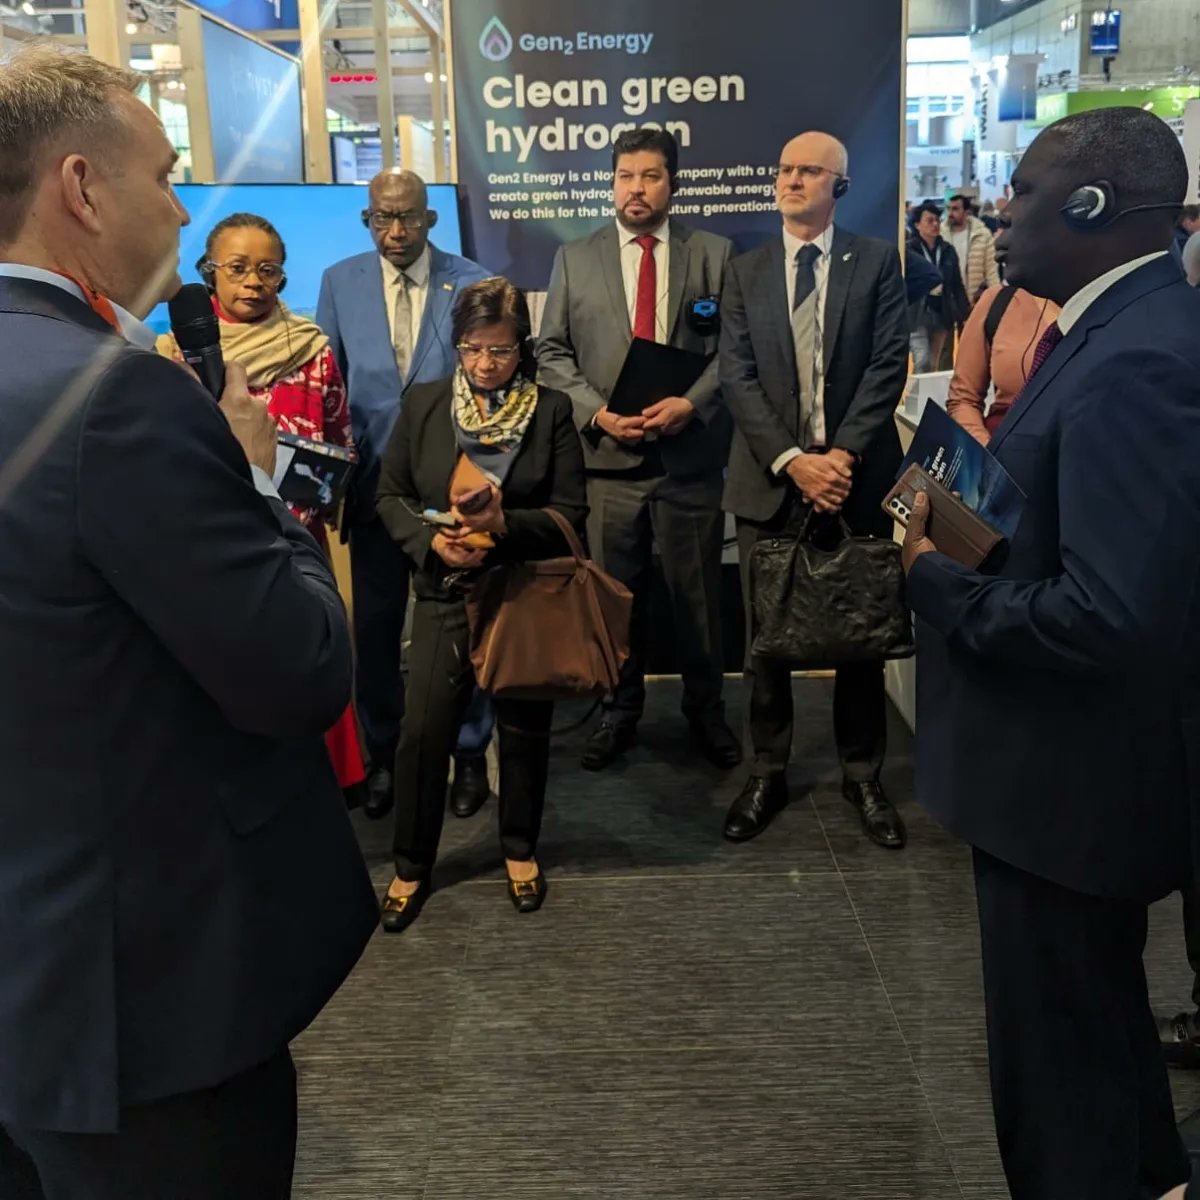 New Zealand is open for business!

That was the message delivered by Ambassador Hawke on Wednesday, at the Hannover Messe, Germany's biggest trade show.

After a tour of stands, Ambassador Hawke gave a speech about the NZ EU FTA and took part in a Q&A.

🇳🇿🤝🇪🇺

#NZEUFTA
#HM24